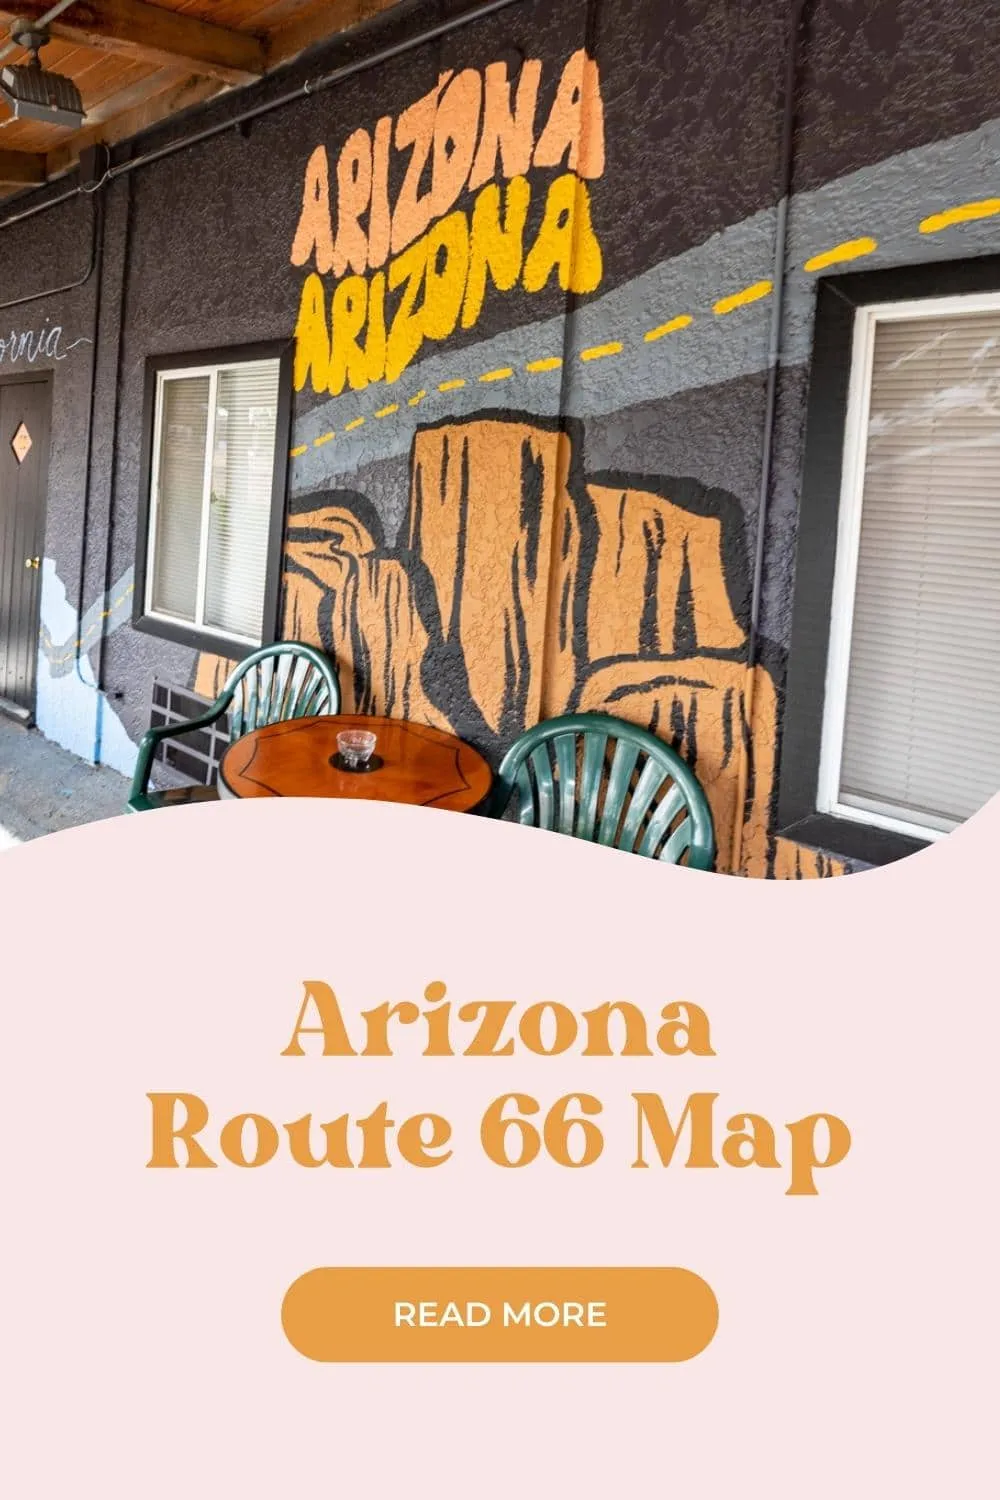 If you're planning a Route 66 road trip you need to know what to see and where to go. Our Arizona Route 66 map contains all the best stops in the state. We've mapped out all the biggest and best roadside attractions, visitor centers, museums, restaurants, diners, fast food, vintage motels, and other iconic stops on this Route 66 Arizona map. #Route66 #Arizona #Route66RoadTrip #ArizonaRoute66 #ArizonaRoute66RoadTrip #ArizonaRoadTrip #travel #RoadTrip